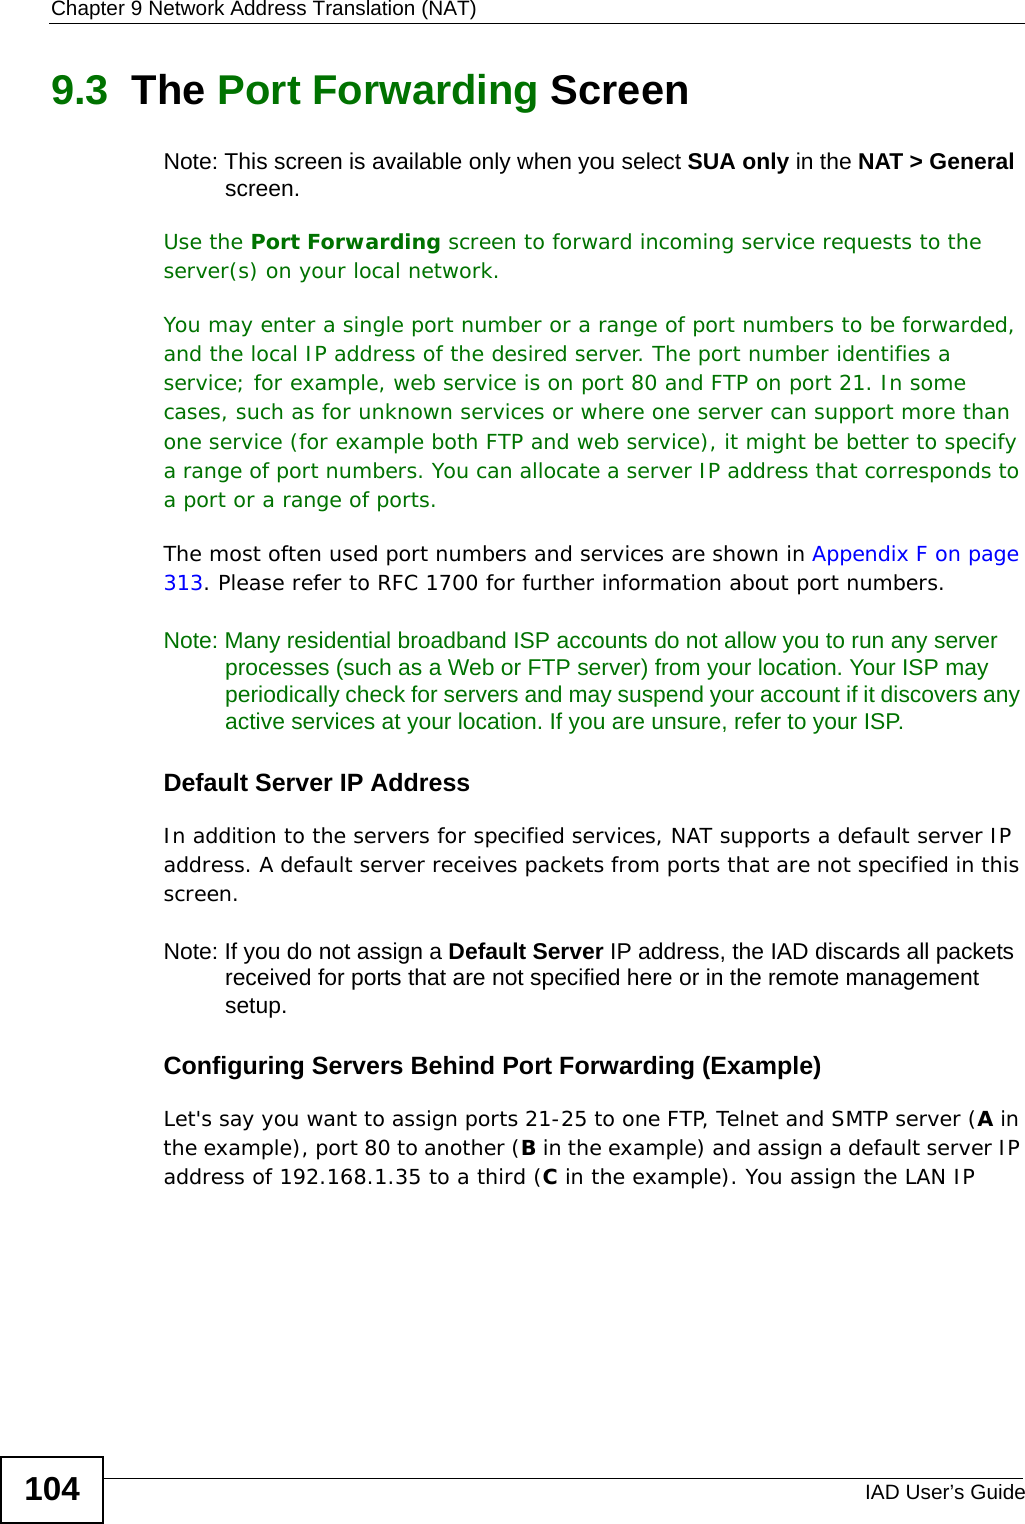 Chapter 9 Network Address Translation (NAT)IAD User’s Guide1049.3  The Port Forwarding Screen Note: This screen is available only when you select SUA only in the NAT &gt; General screen.Use the Port Forwarding screen to forward incoming service requests to the server(s) on your local network.You may enter a single port number or a range of port numbers to be forwarded, and the local IP address of the desired server. The port number identifies a service; for example, web service is on port 80 and FTP on port 21. In some cases, such as for unknown services or where one server can support more than one service (for example both FTP and web service), it might be better to specify a range of port numbers. You can allocate a server IP address that corresponds to a port or a range of ports.The most often used port numbers and services are shown in Appendix F on page 313. Please refer to RFC 1700 for further information about port numbers. Note: Many residential broadband ISP accounts do not allow you to run any server processes (such as a Web or FTP server) from your location. Your ISP may periodically check for servers and may suspend your account if it discovers any active services at your location. If you are unsure, refer to your ISP.Default Server IP AddressIn addition to the servers for specified services, NAT supports a default server IP address. A default server receives packets from ports that are not specified in this screen.Note: If you do not assign a Default Server IP address, the IAD discards all packets received for ports that are not specified here or in the remote management setup.Configuring Servers Behind Port Forwarding (Example)Let&apos;s say you want to assign ports 21-25 to one FTP, Telnet and SMTP server (A in the example), port 80 to another (B in the example) and assign a default server IP address of 192.168.1.35 to a third (C in the example). You assign the LAN IP 